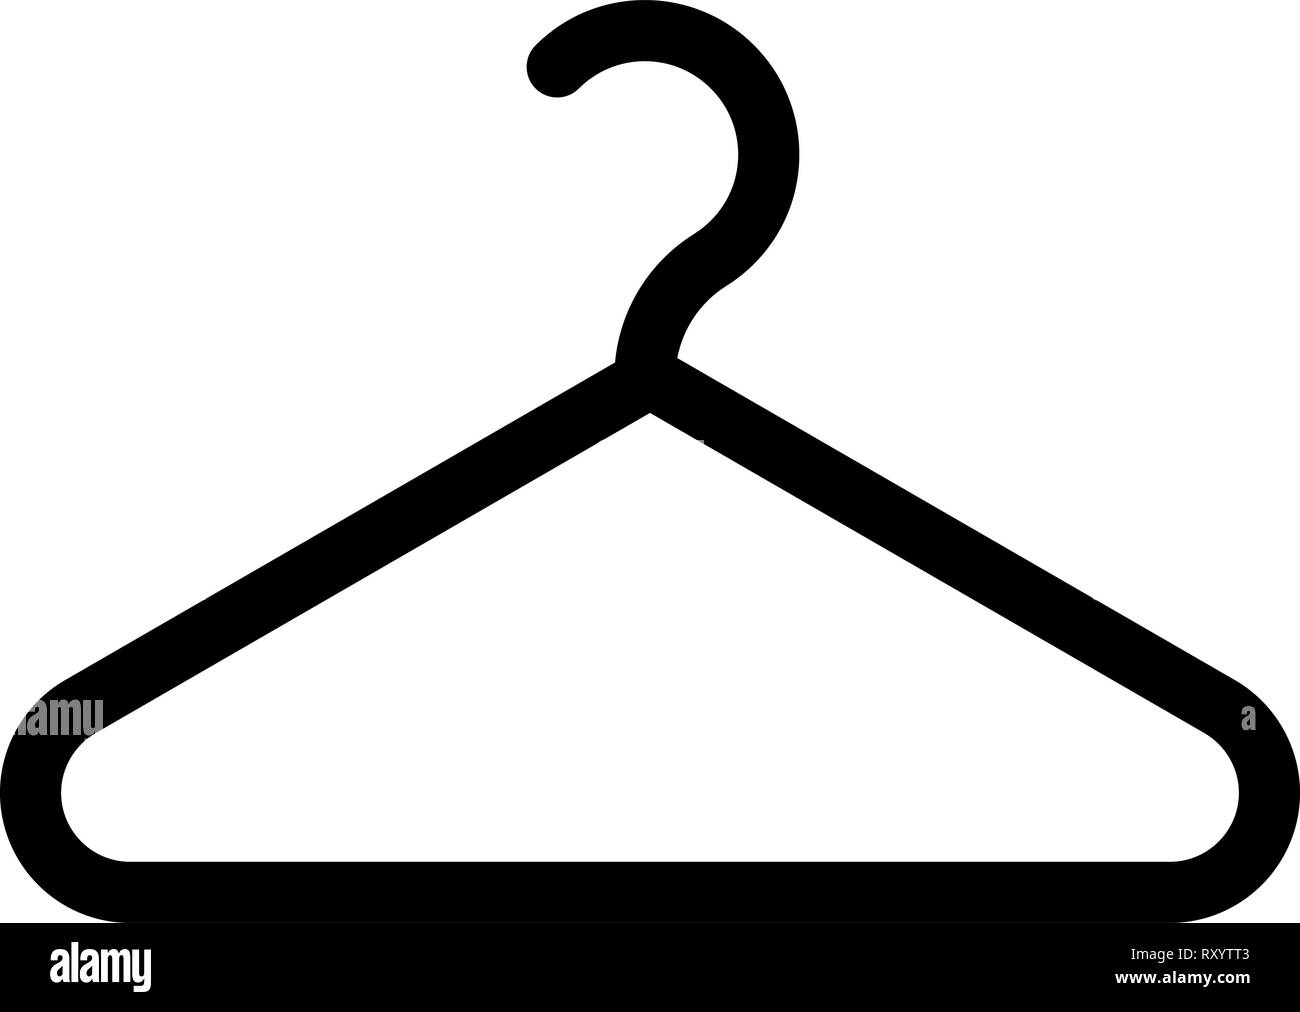 Hanger Clothes hanger icon black color vector illustration flat style simple image Stock Vector